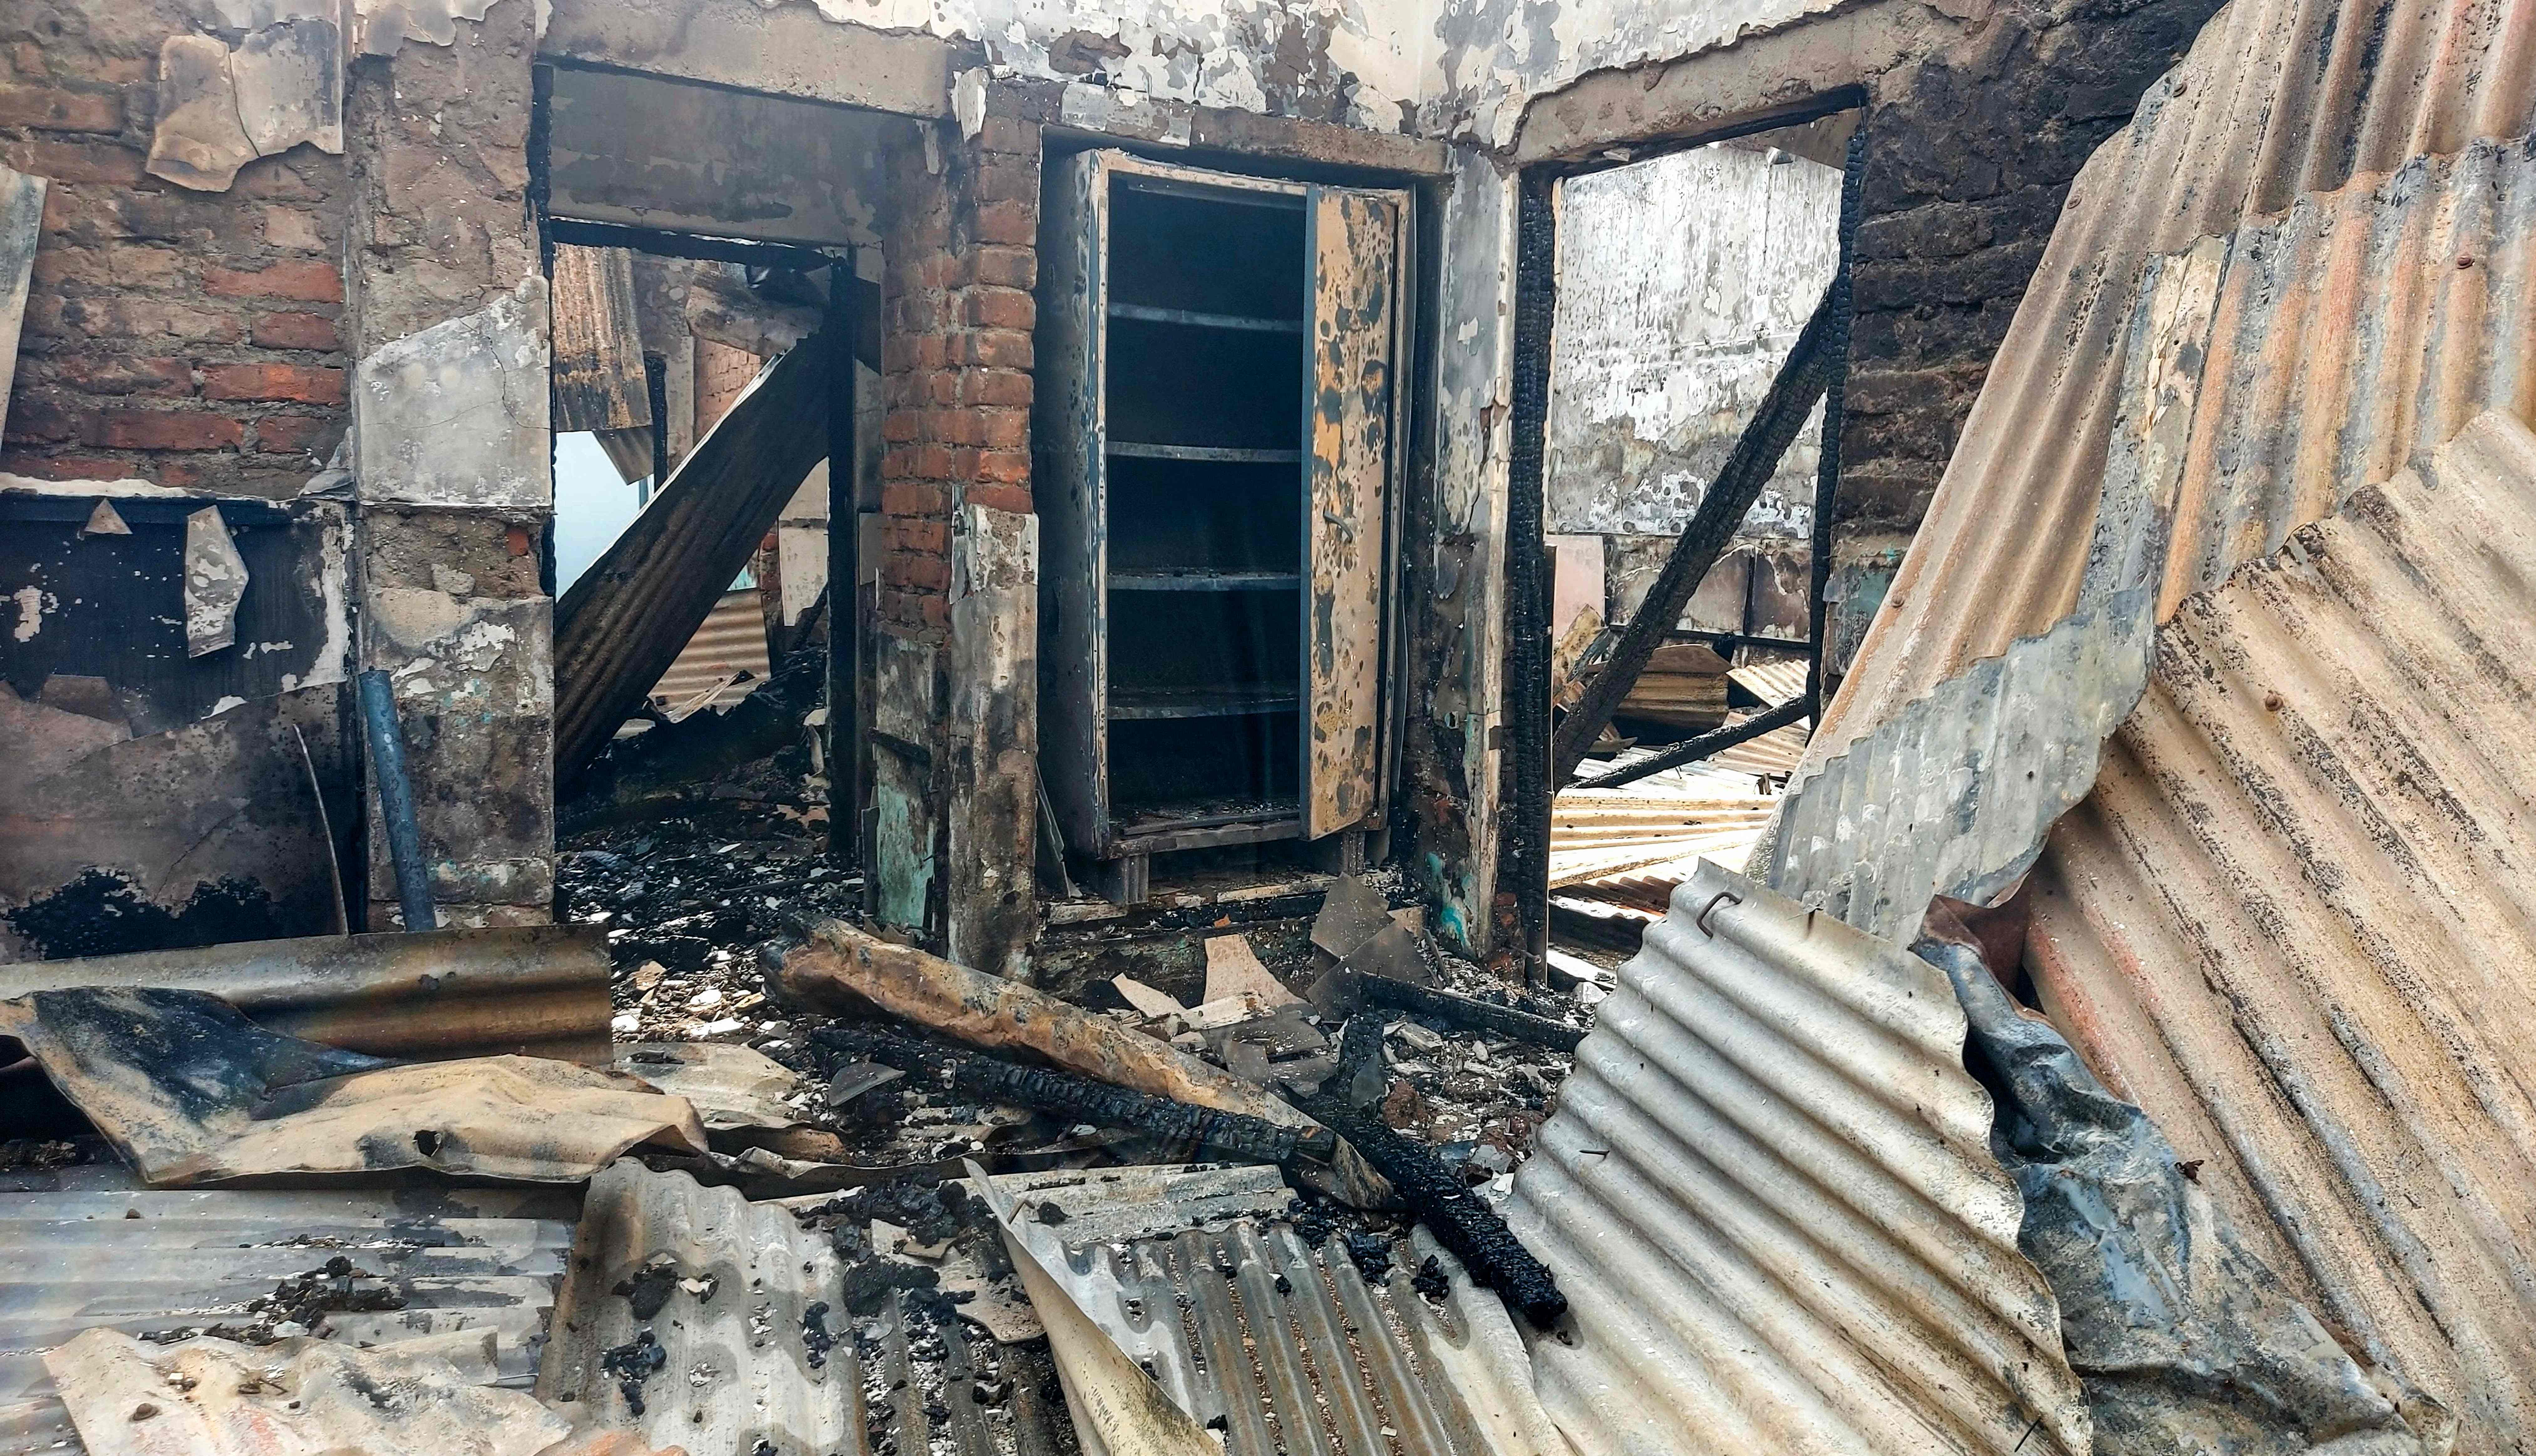 Charred remains of official residence of Manipur’s minister Nemcha Kipgen in Imphal, which was set ablaze by mob last evening during ongoing ethnic violence in India’s north-eastern Manipur state